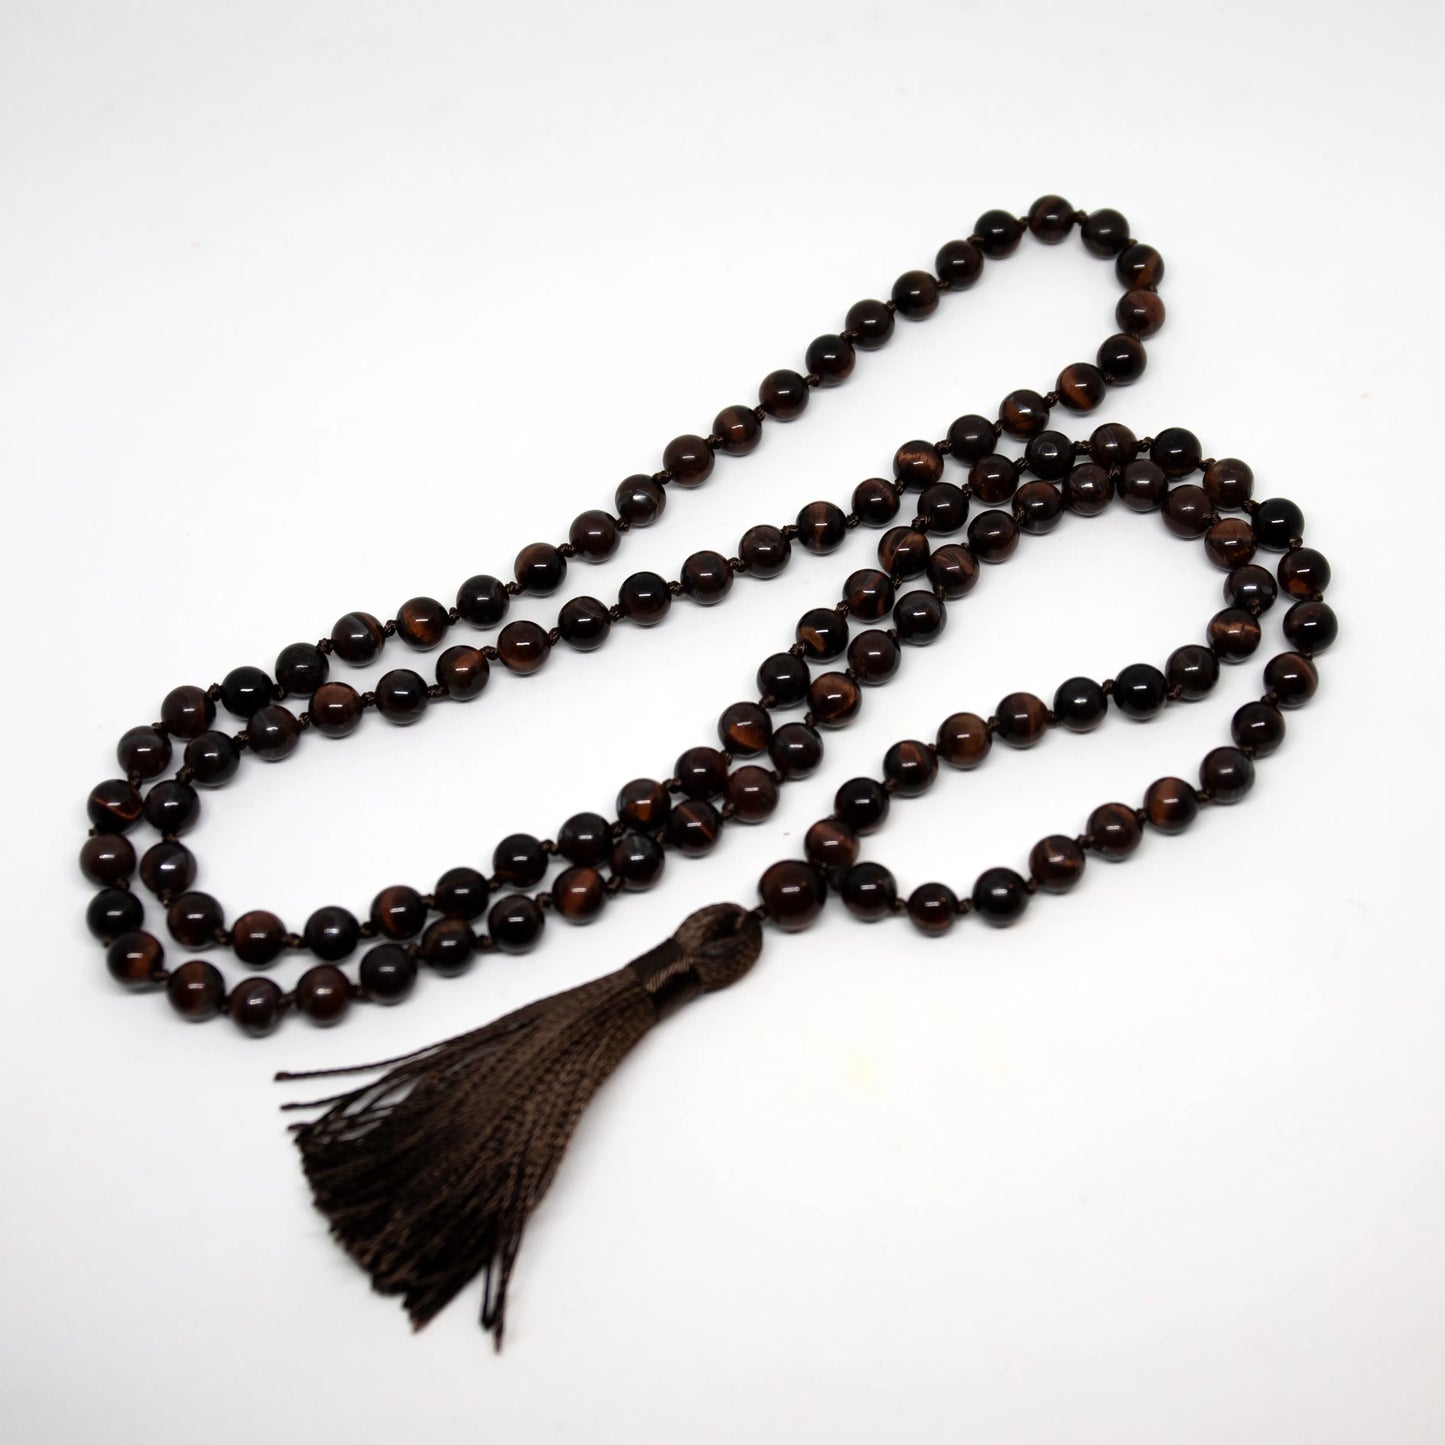 Red Tiger's Eye Knotted 108 Bead Mala - Prayer Beads - 8mm (1 Pack)